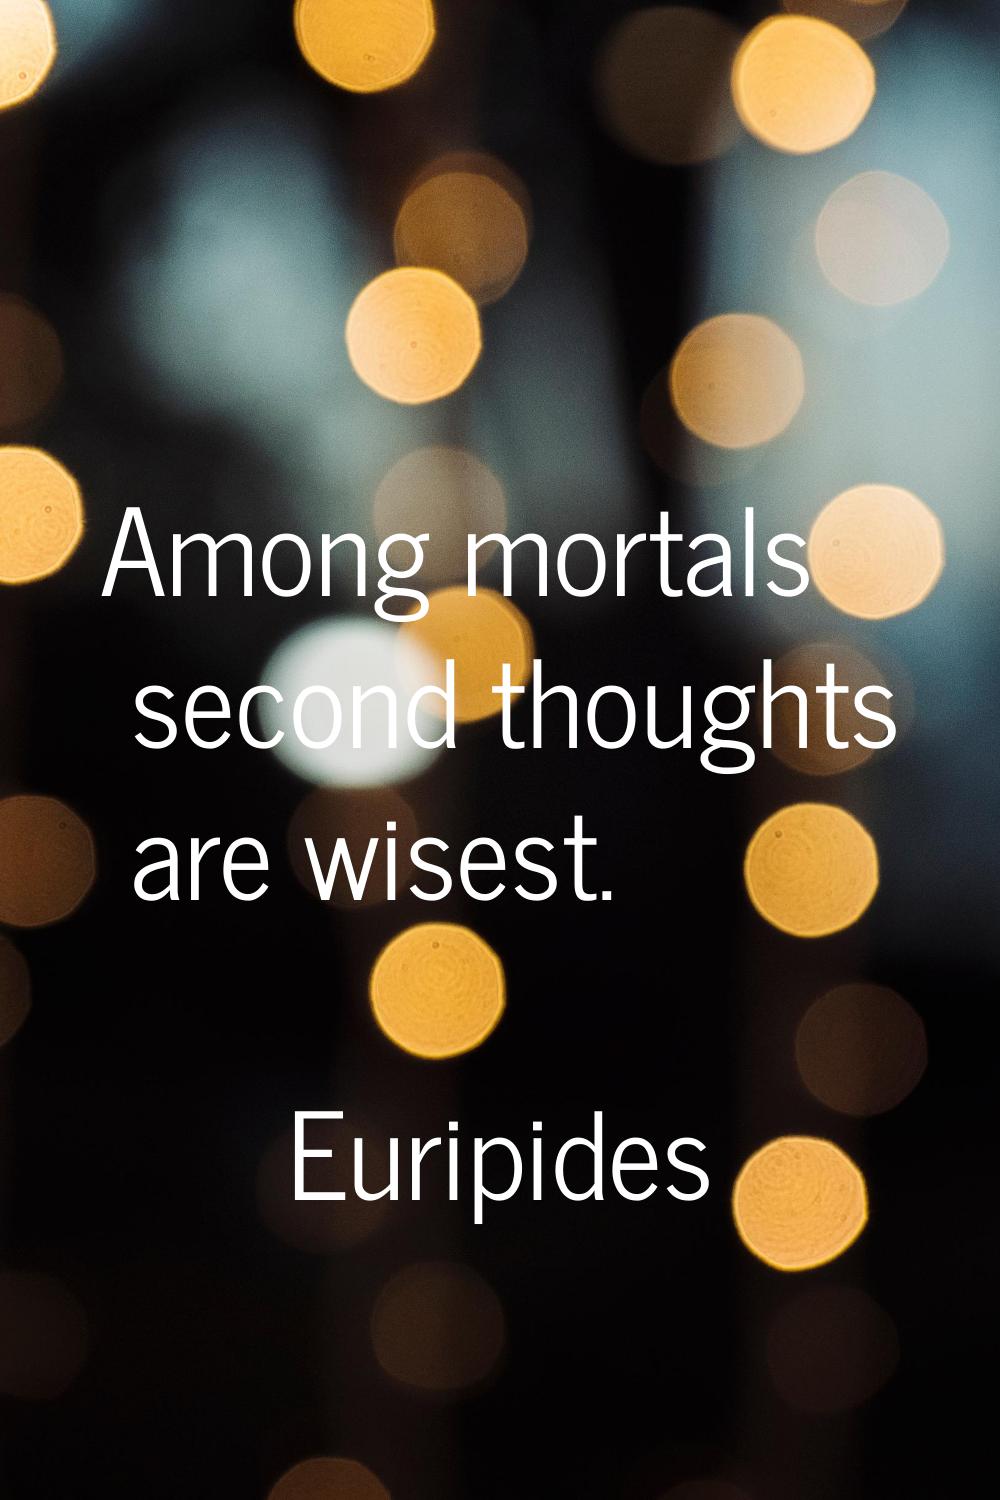 Among mortals second thoughts are wisest.